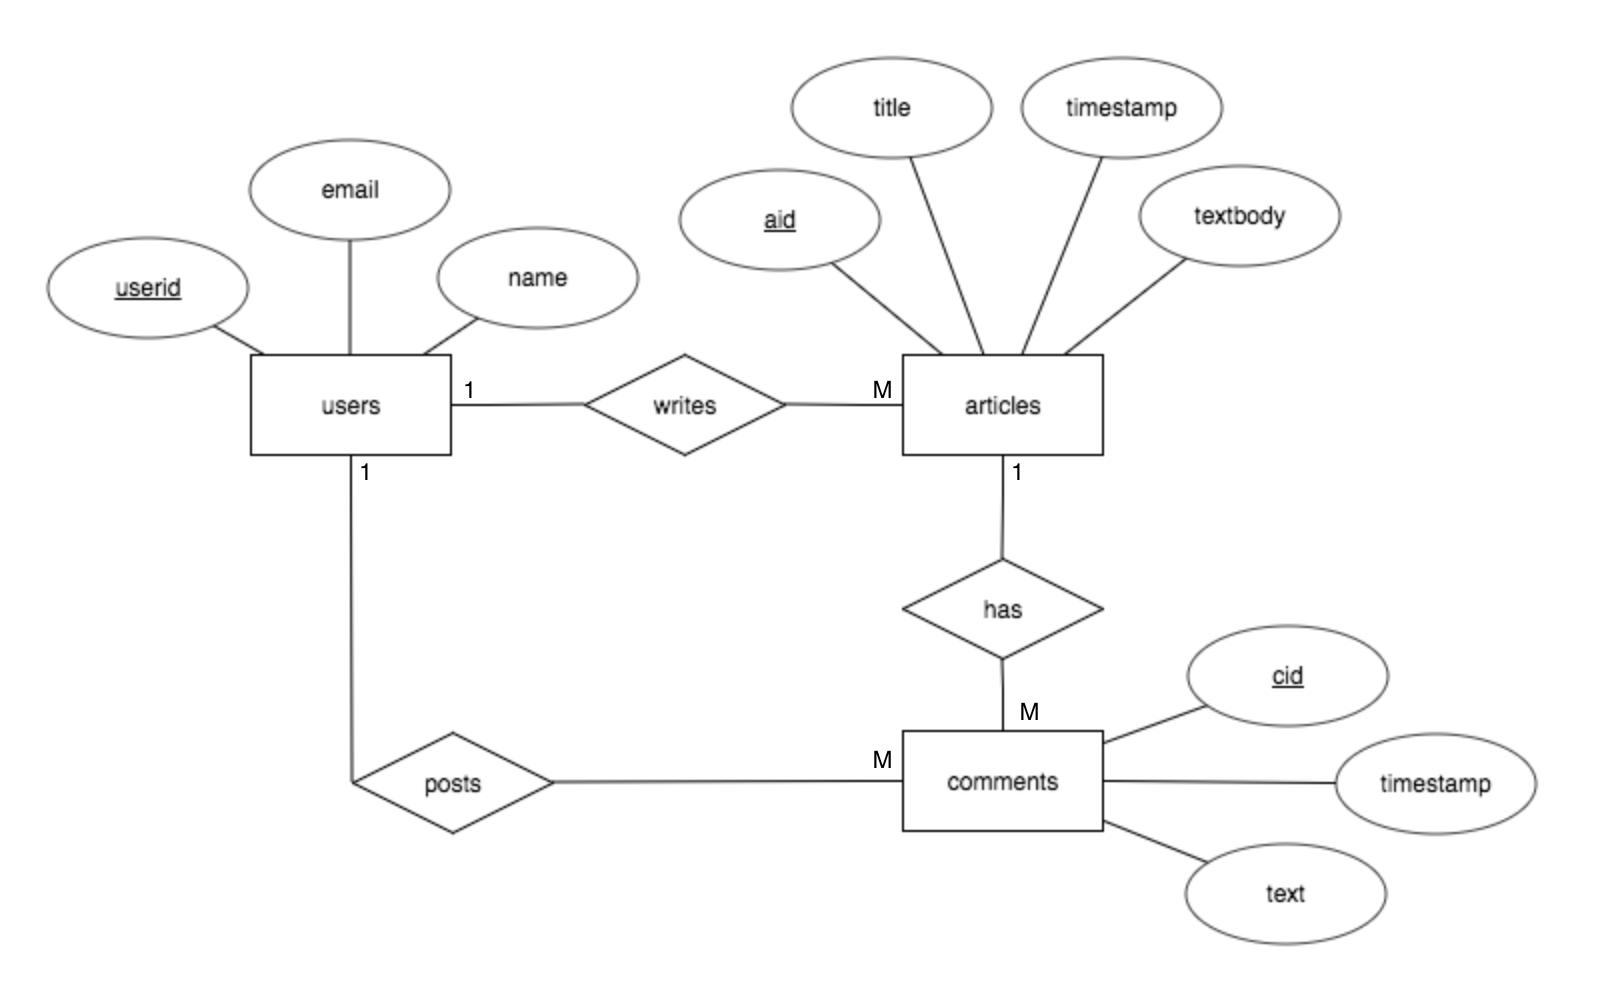 A Quick Look At Entity Relationship Diagrams - David Tsai throughout Er Diagram With Queries